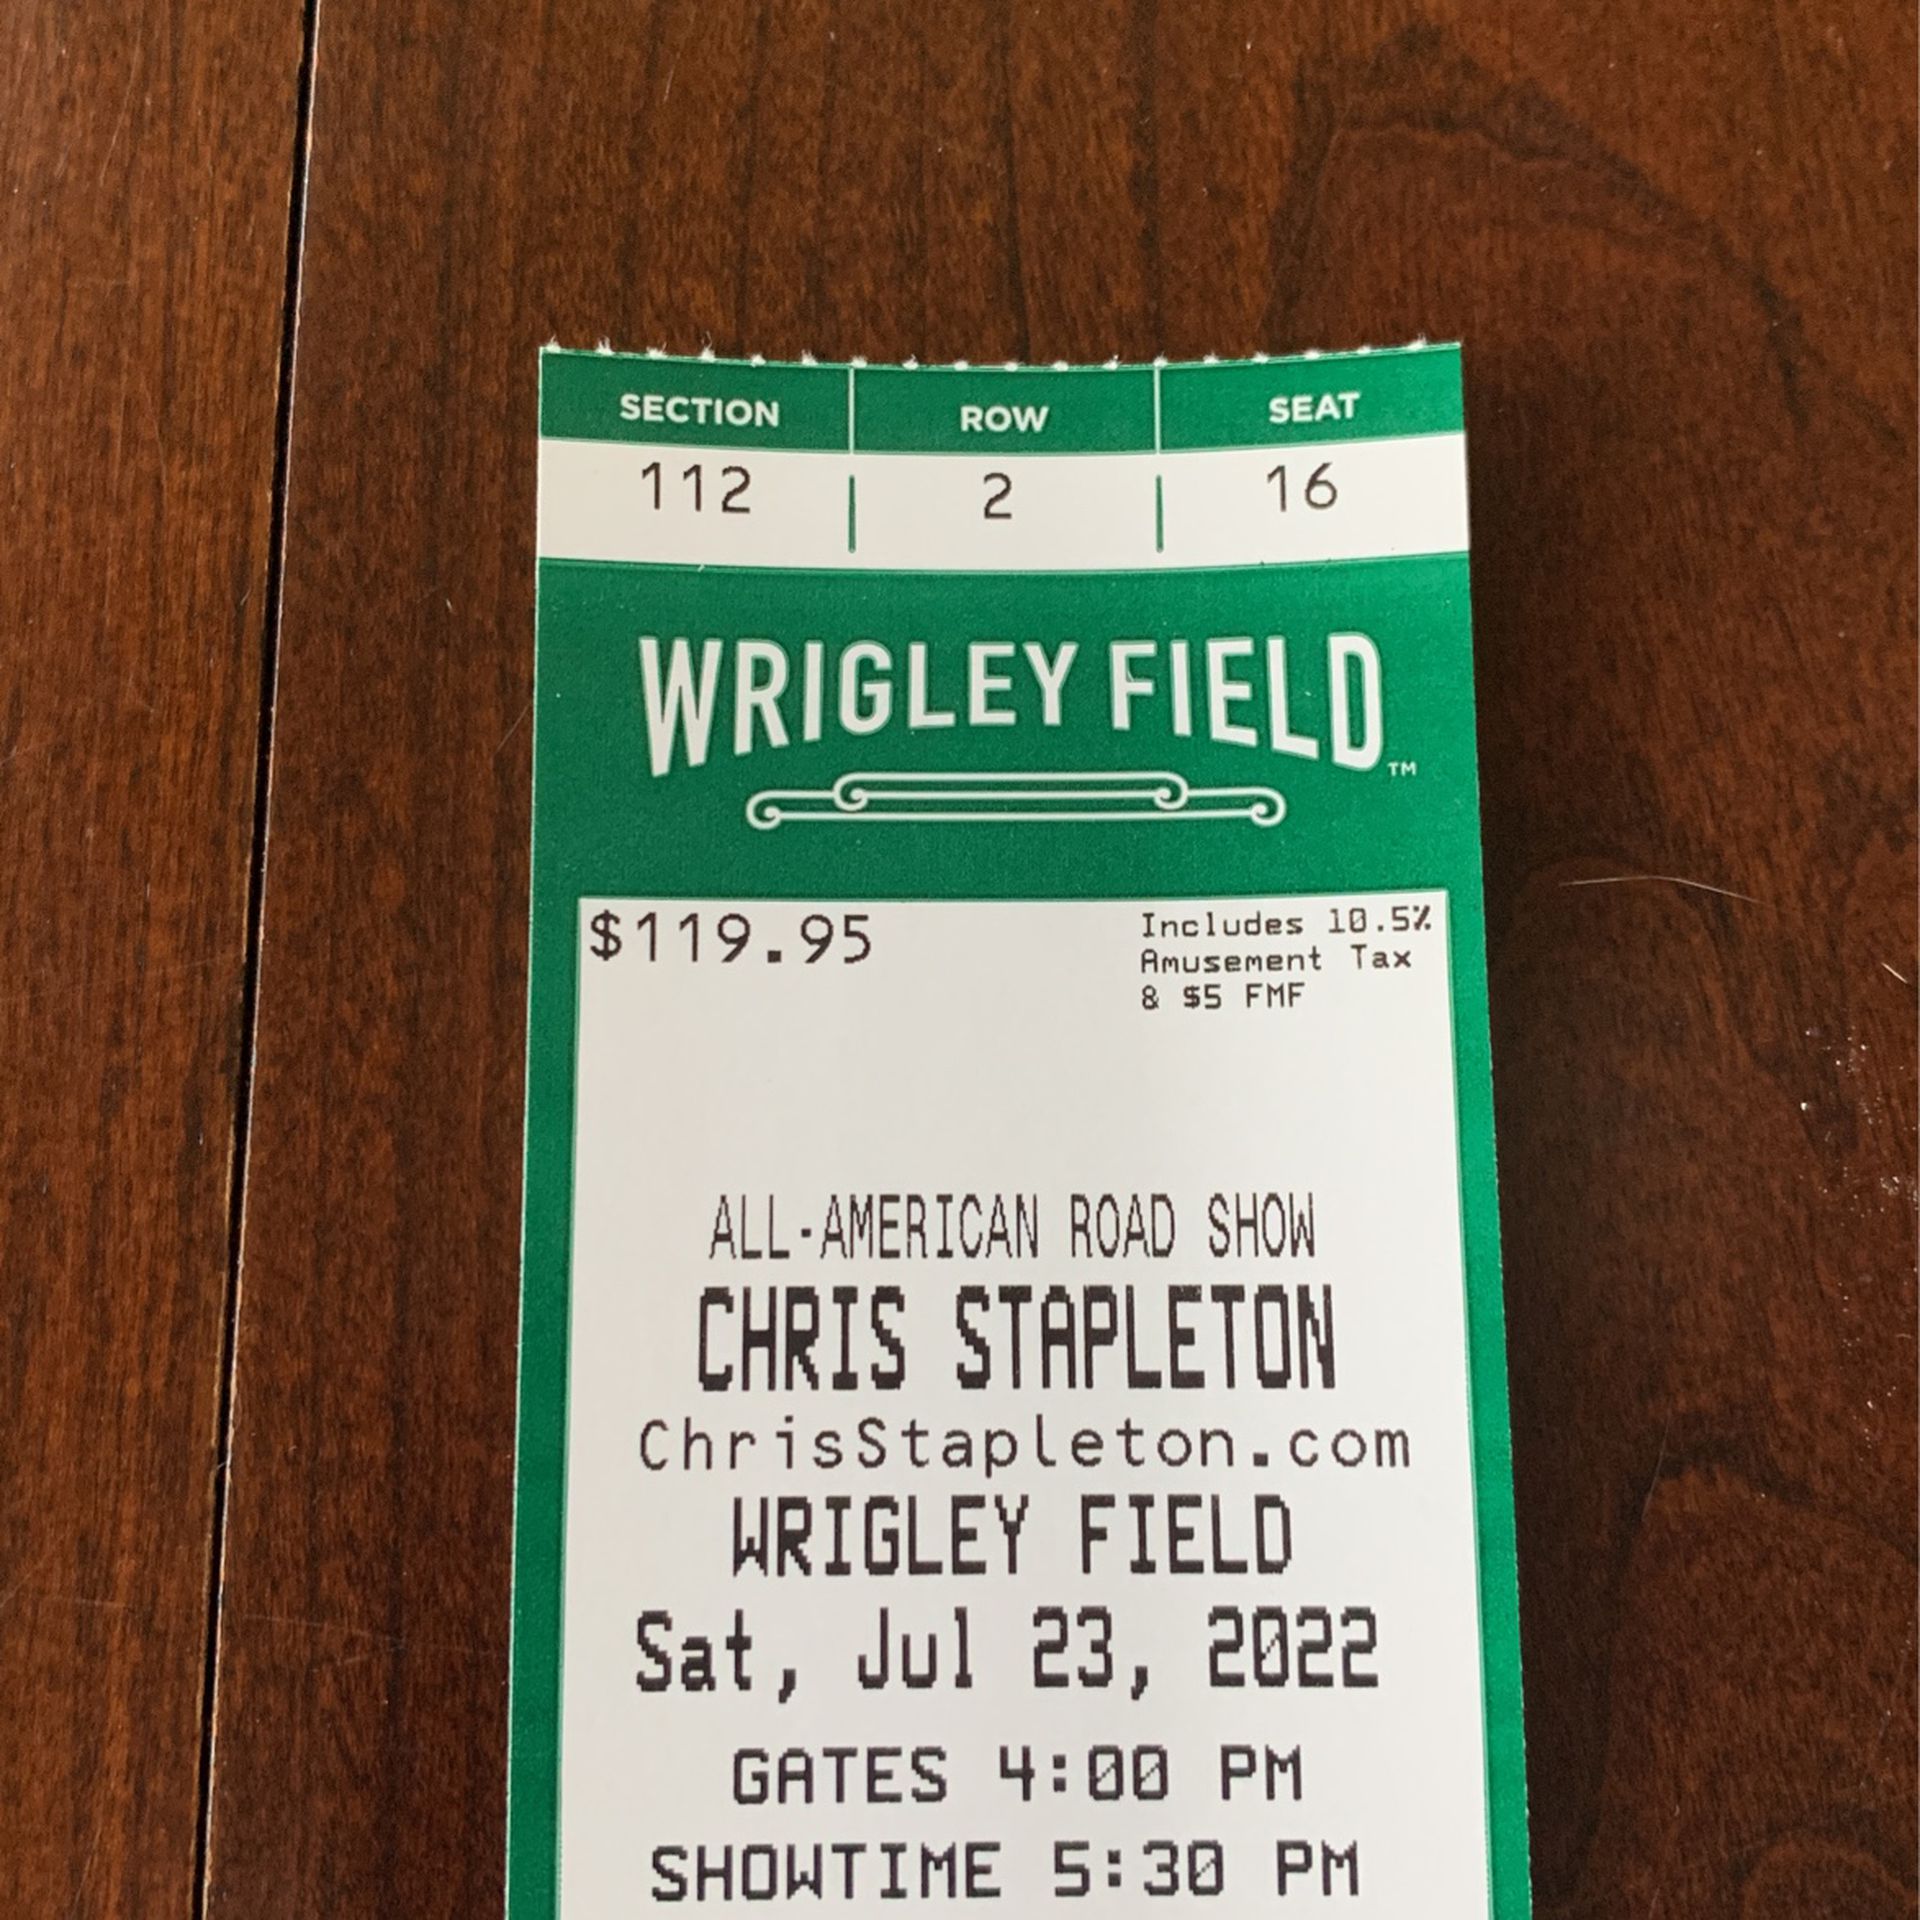 Chris Stapleton 2 Tickets All - American Road Show @ Wrigley Field July 23, 2022